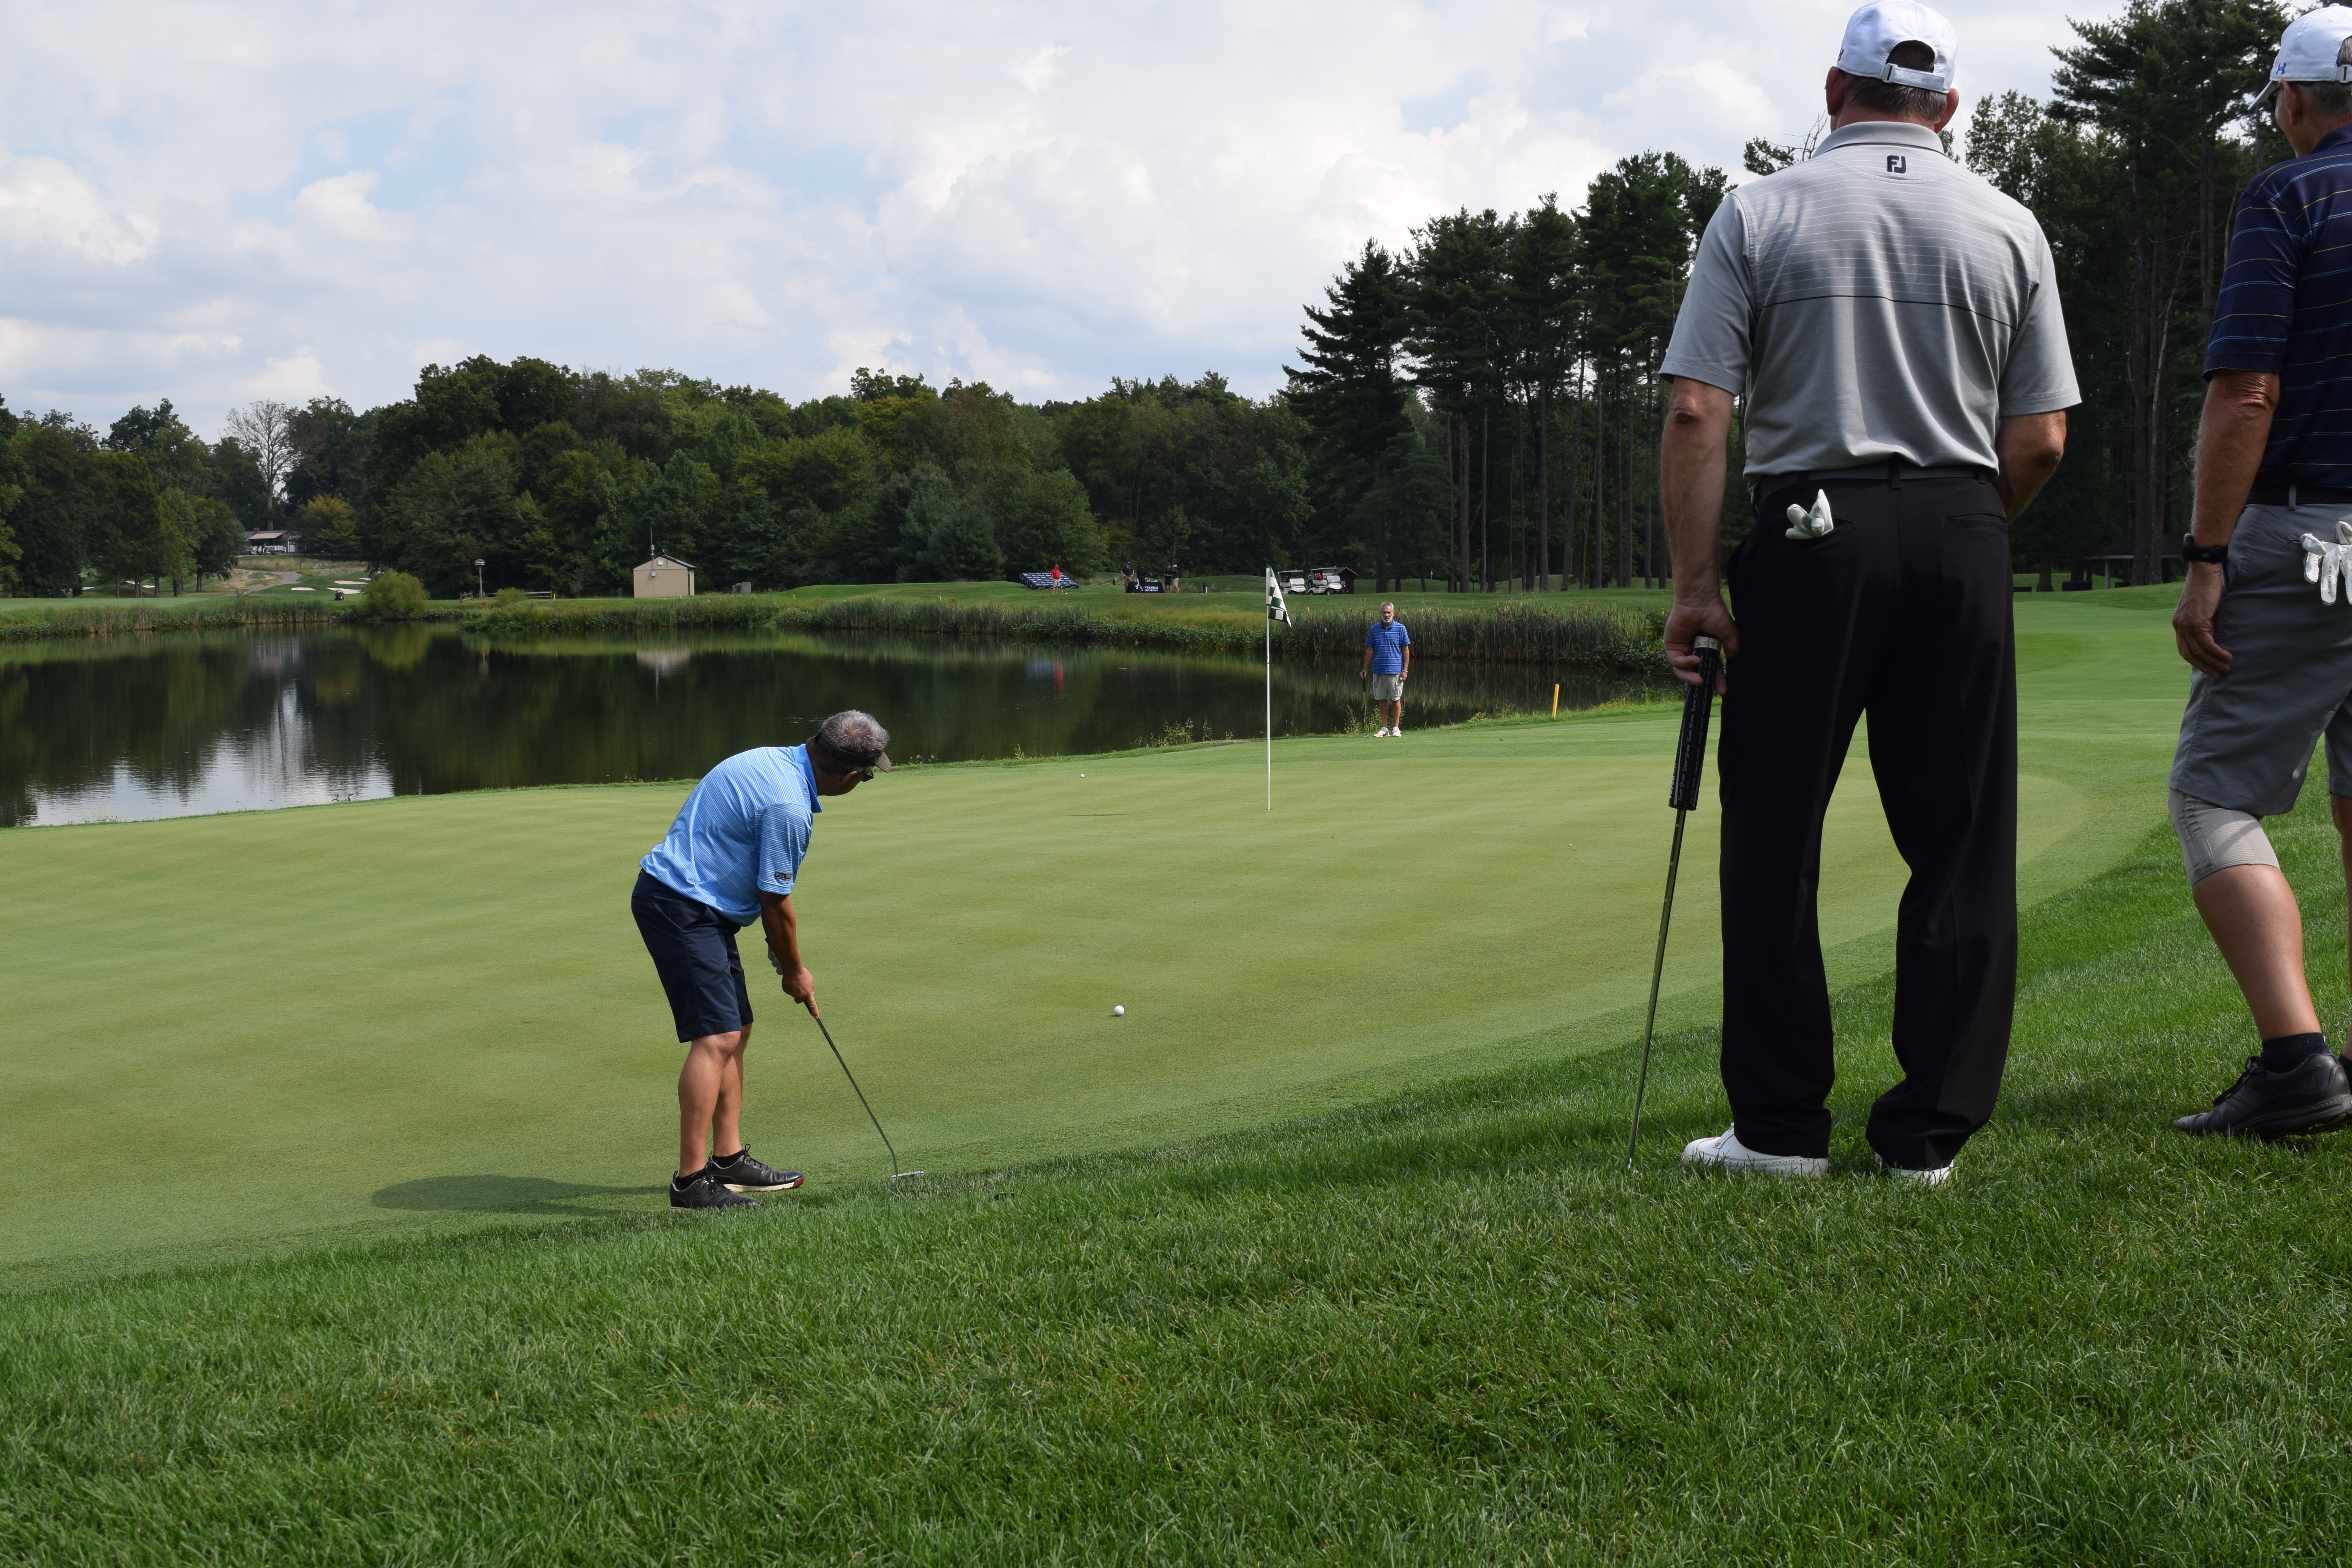 golfer lining up a shot at 2019 Autism New Jersey golf outing